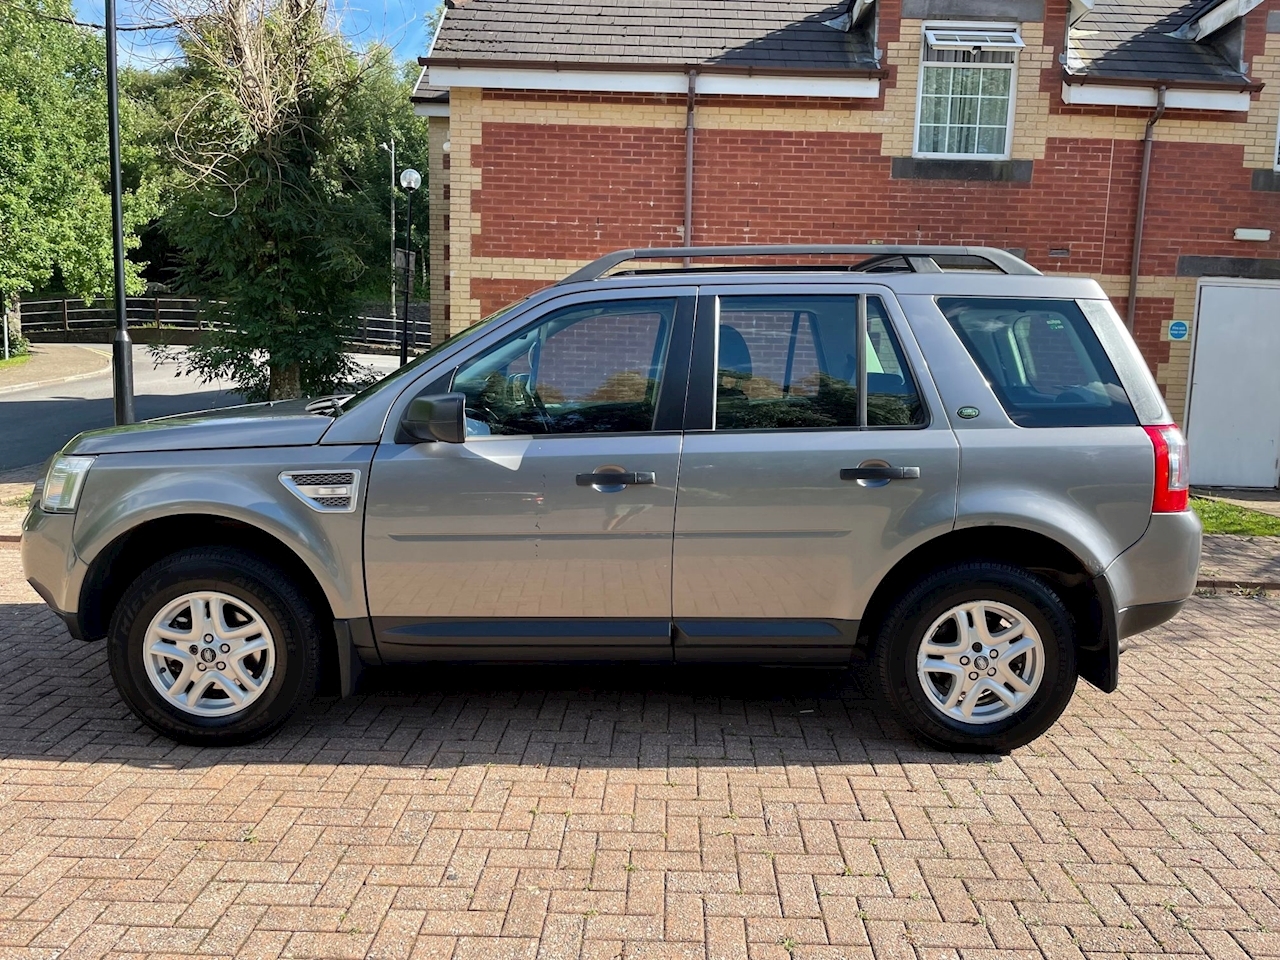 2.2 TD4 S SUV 5dr Diesel Manual 4WD Euro 4 (160 ps)